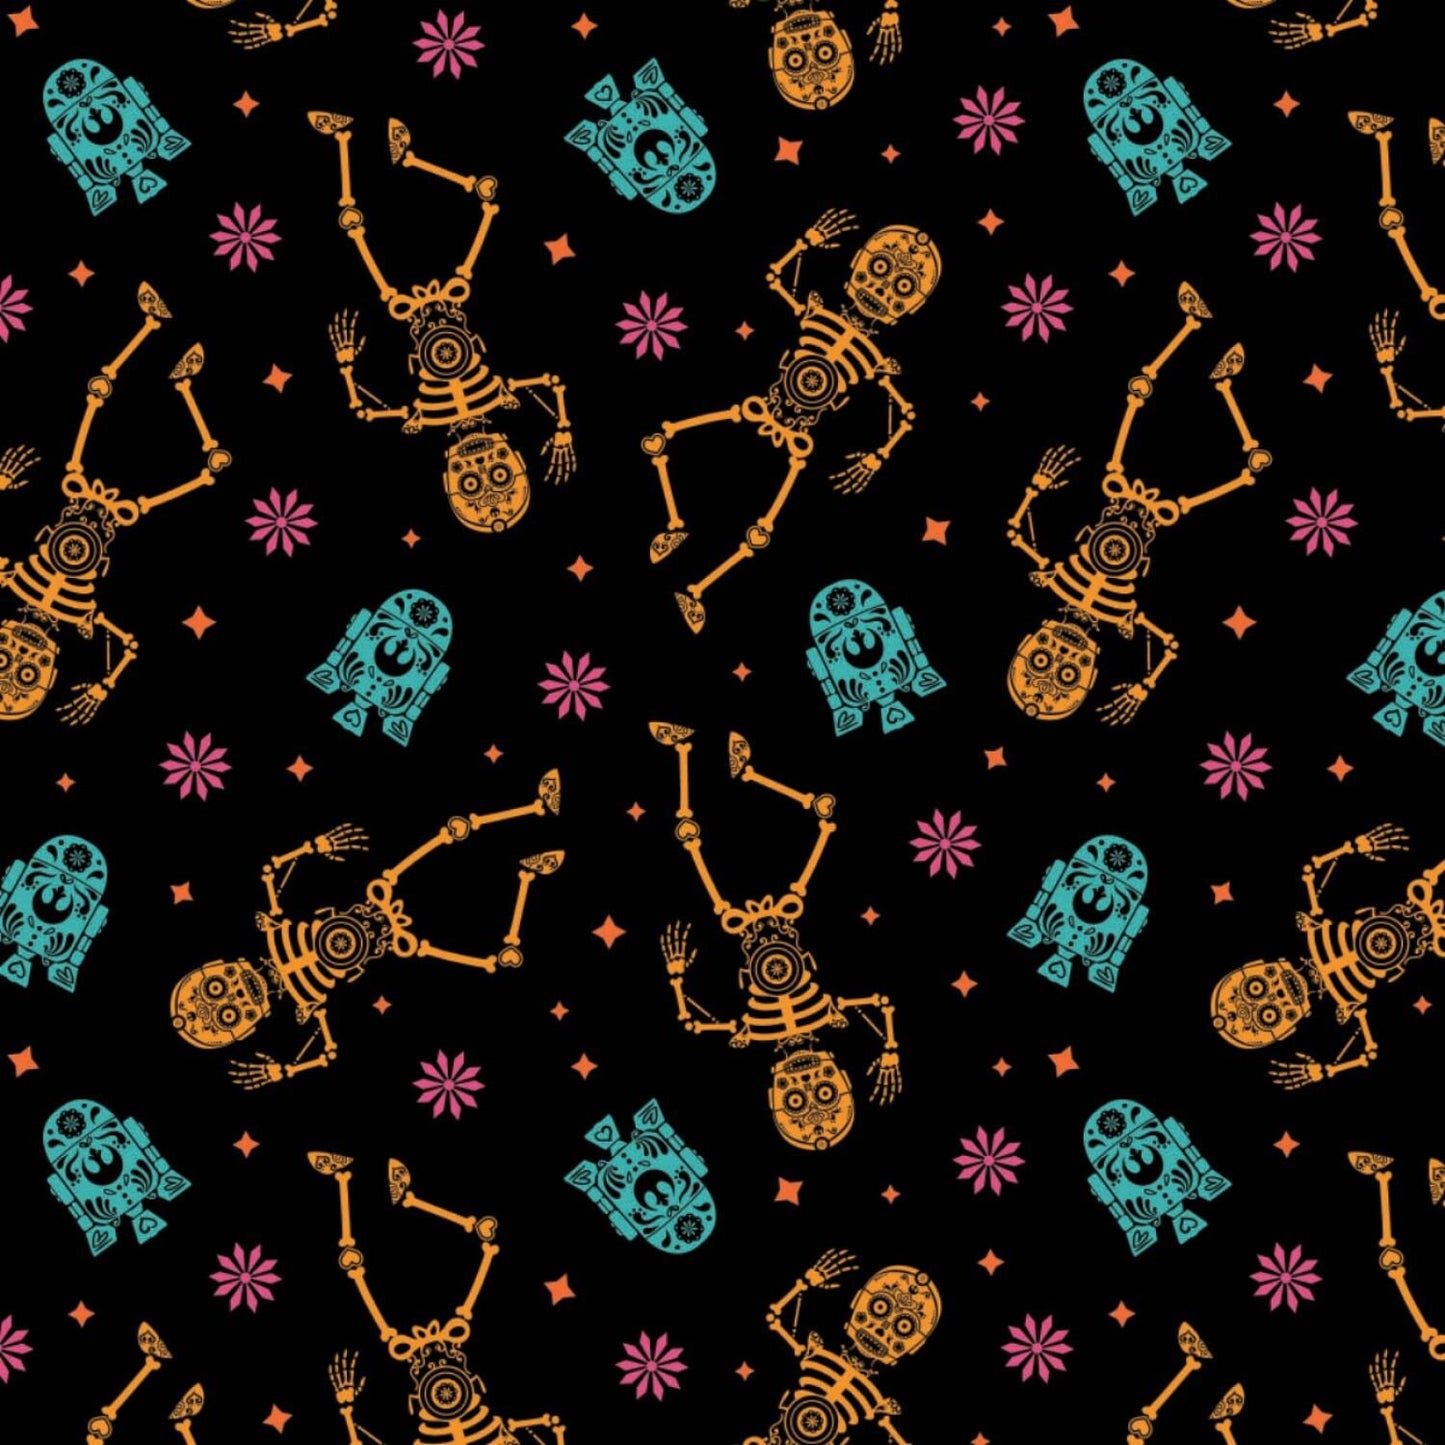 Character Halloween 2 Licensed Star Wars Sugar Droids Tossed Black 73010978-2 Cotton Woven Fabric